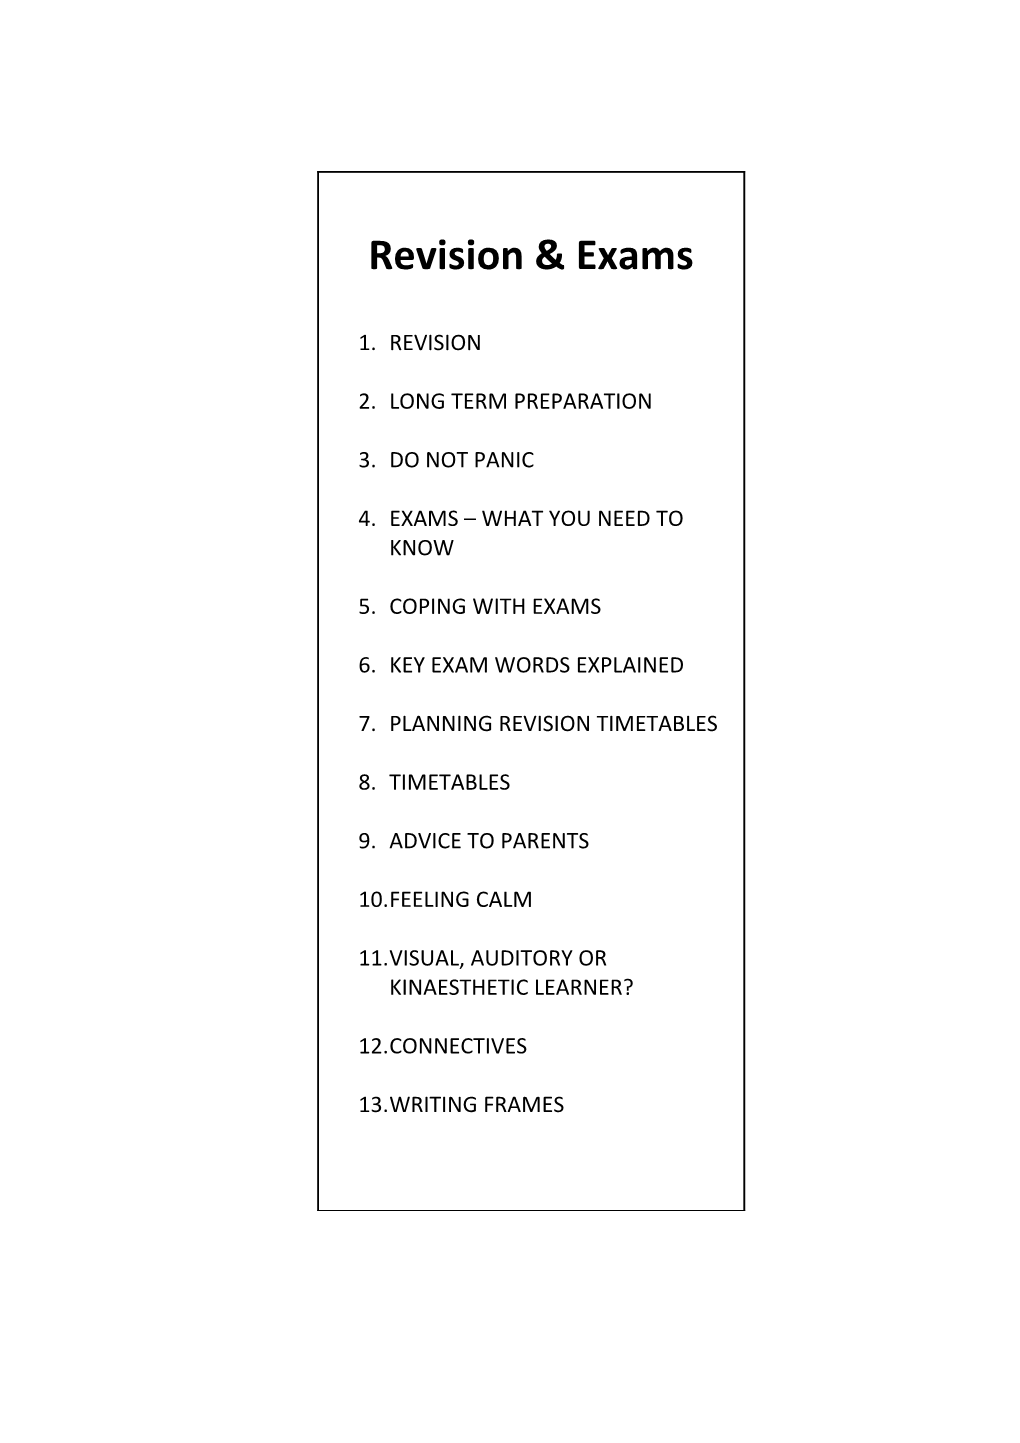 Exams What You Need to Know